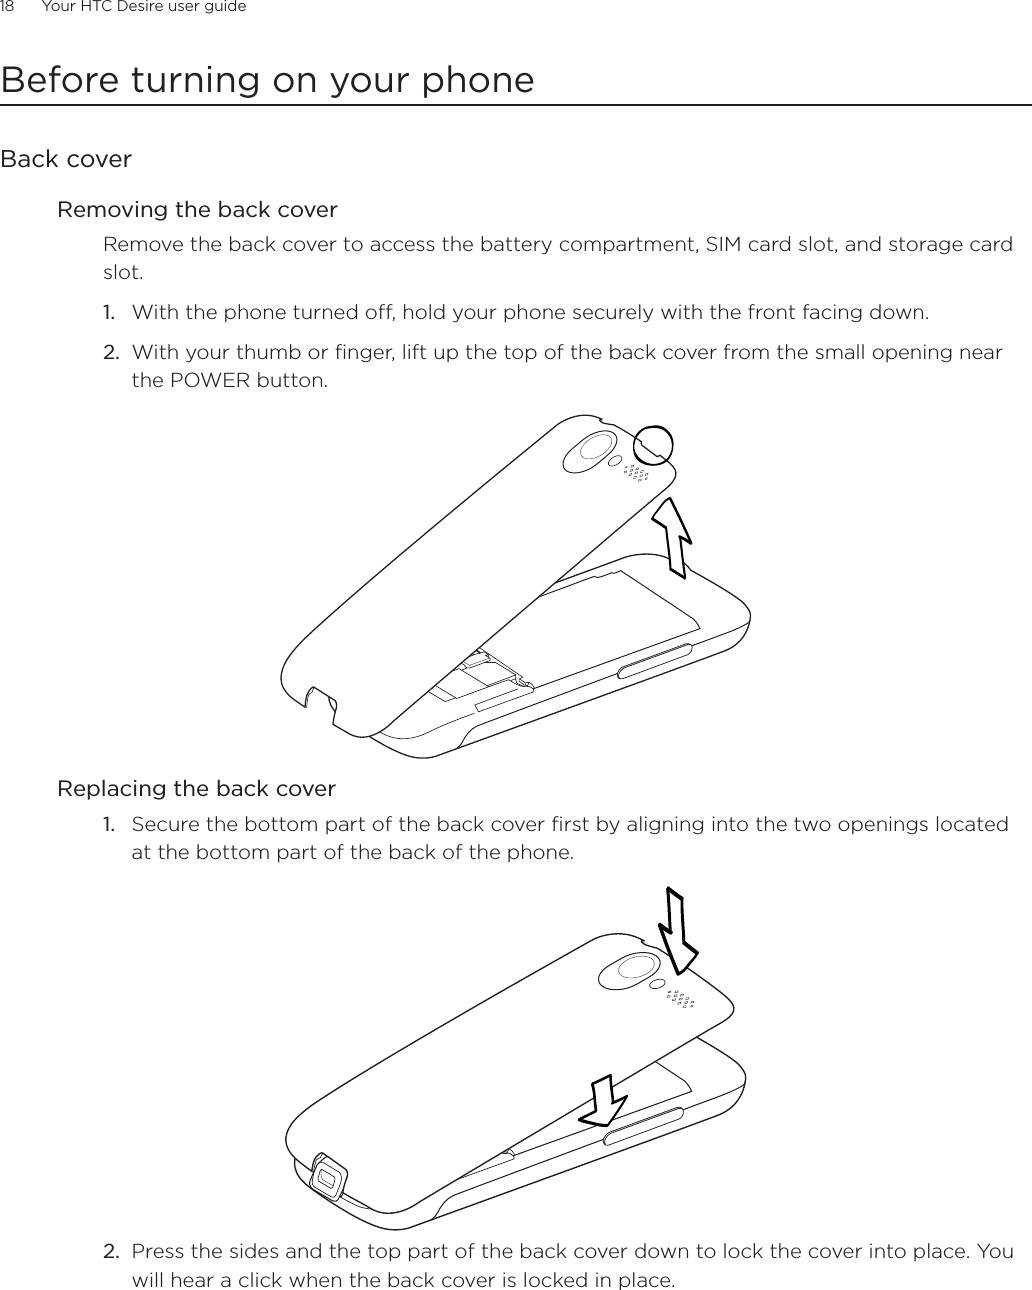 18      Your HTC Desire user guide      Before turning on your phoneBack coverRemoving the back coverRemove the back cover to access the battery compartment, SIM card slot, and storage card slot.With the phone turned off, hold your phone securely with the front facing down.With your thumb or finger, lift up the top of the back cover from the small opening near the POWER button.Replacing the back coverSecure the bottom part of the back cover first by aligning into the two openings located at the bottom part of the back of the phone.2. Press the sides and the top part of the back cover down to lock the cover into place. You will hear a click when the back cover is locked in place.  1.2.1.